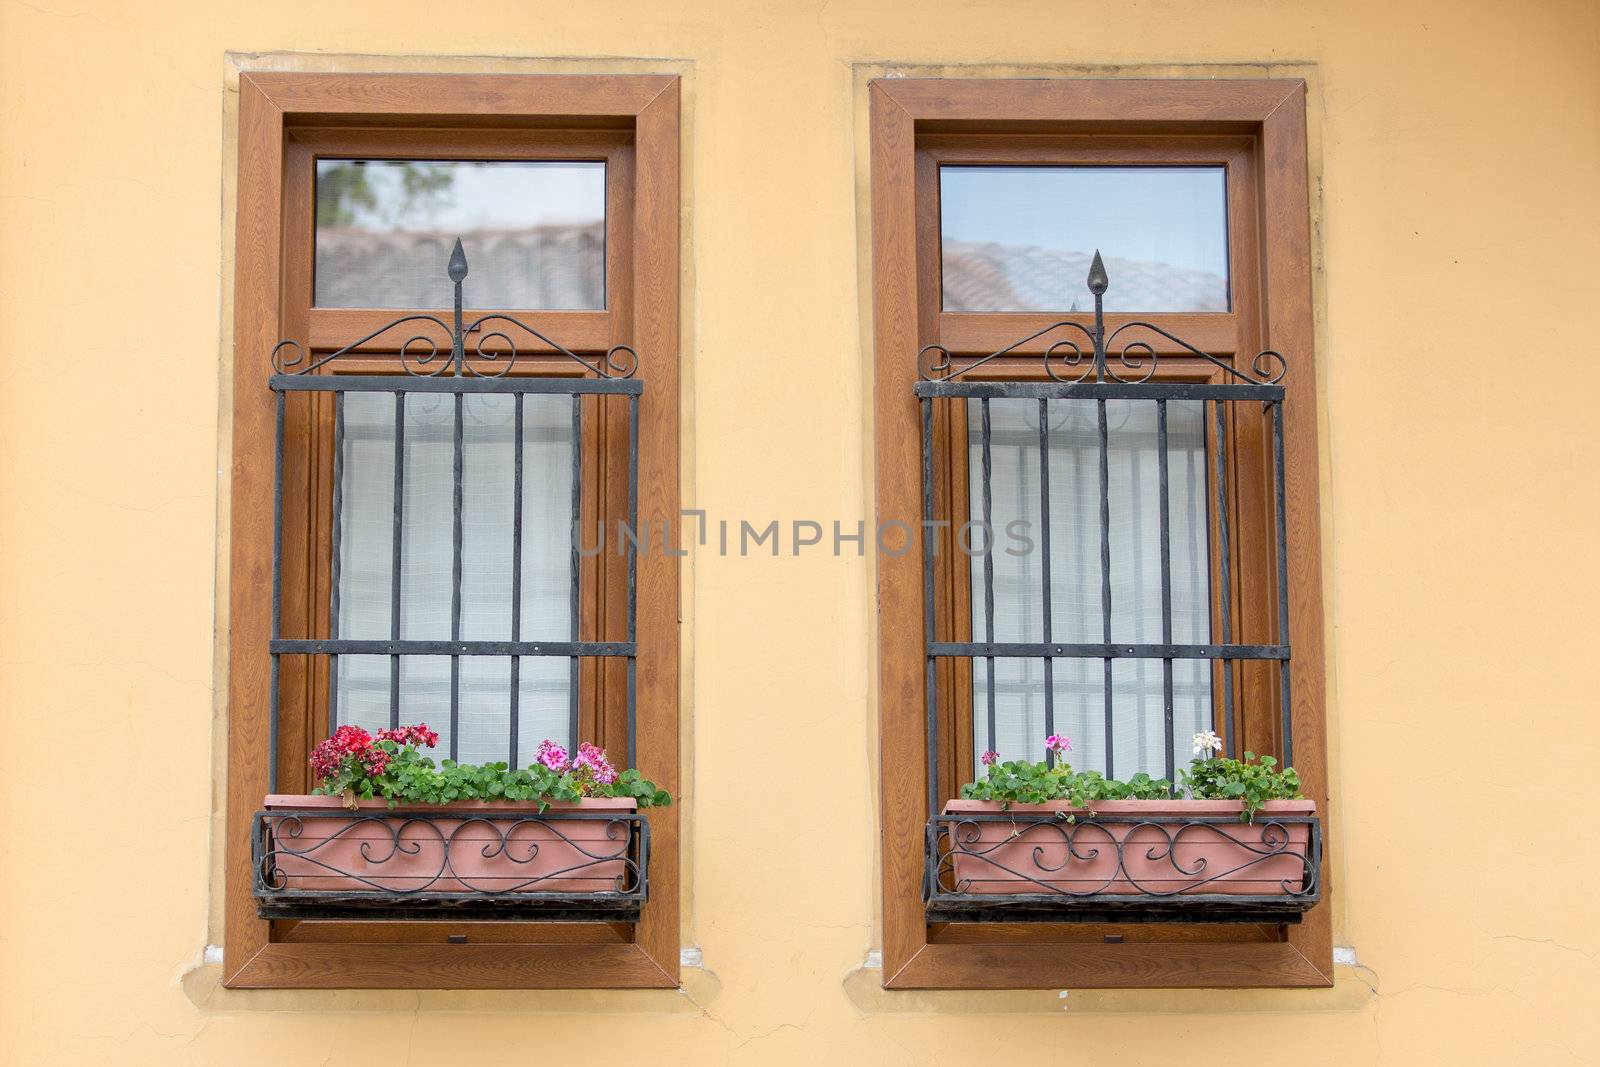 Turkish old fashioned house windows with black bars and geraniums infront of them.